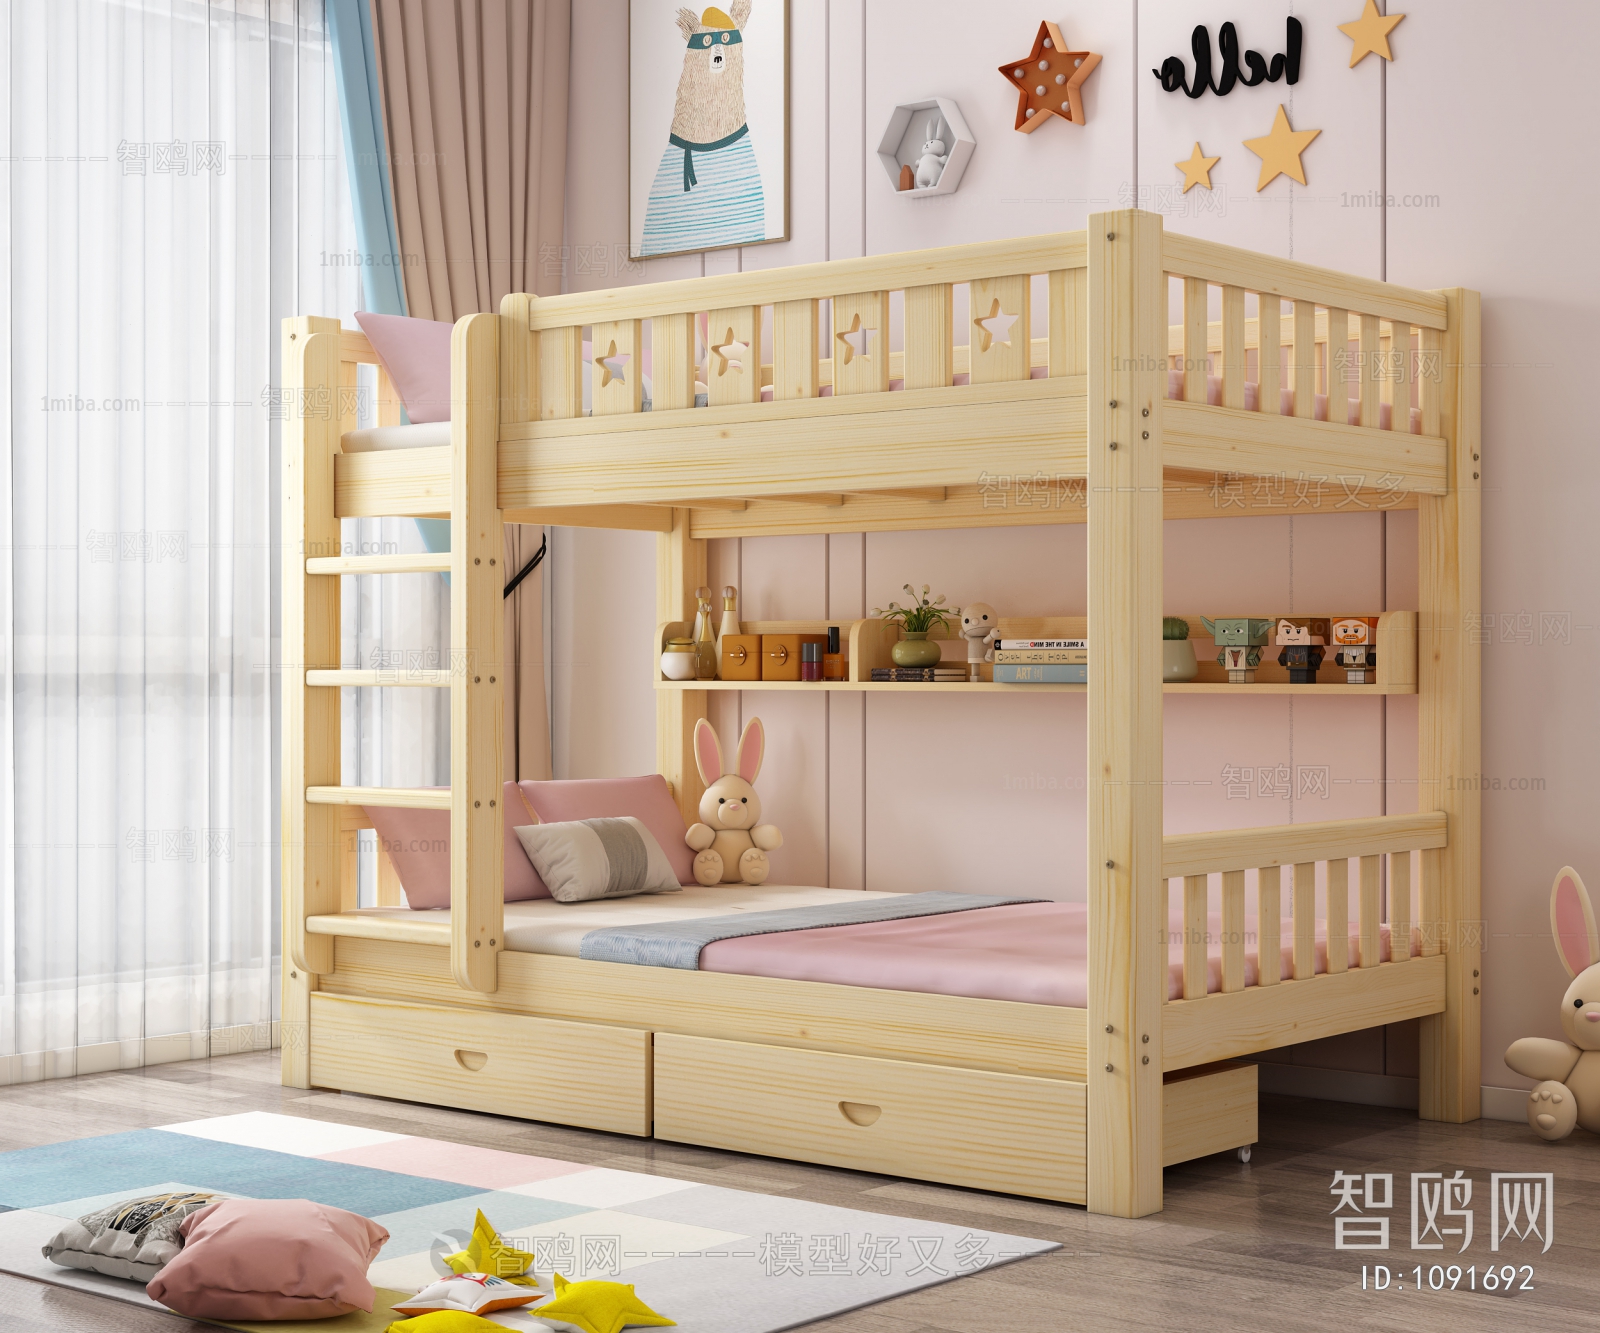 Nordic Style Bunk Bed